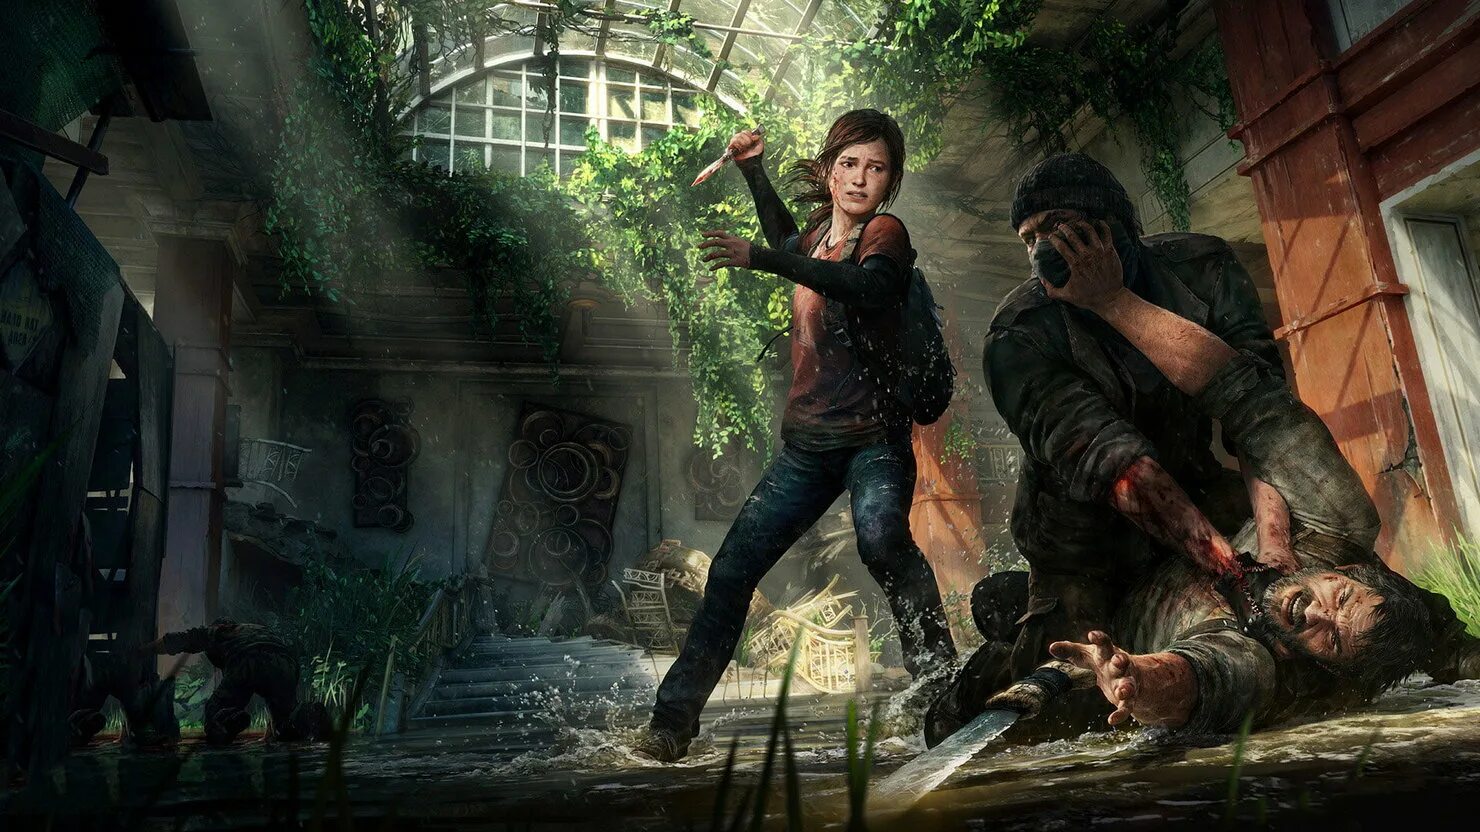 Джоэл the last of us. The last of us ремейк Джоэл. The last of us 2013. Игра фаст оф фаст